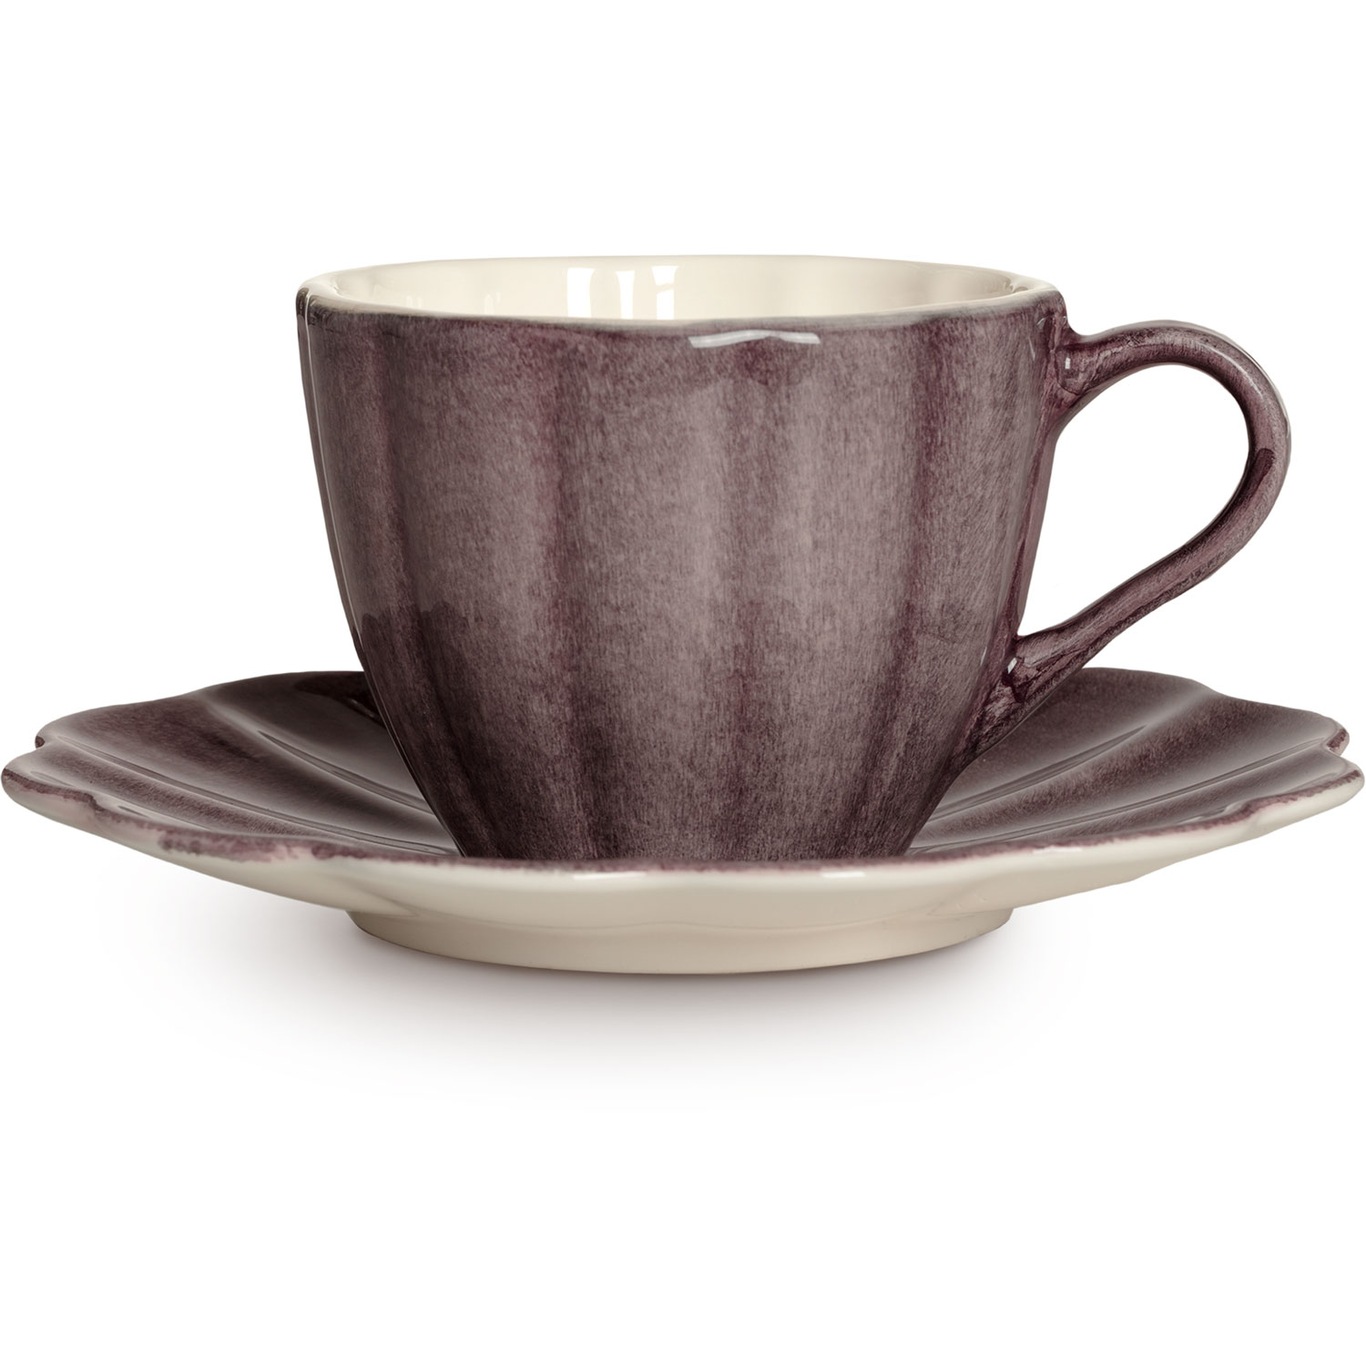 Oyster Cup With Saucer 25 cl, Plum